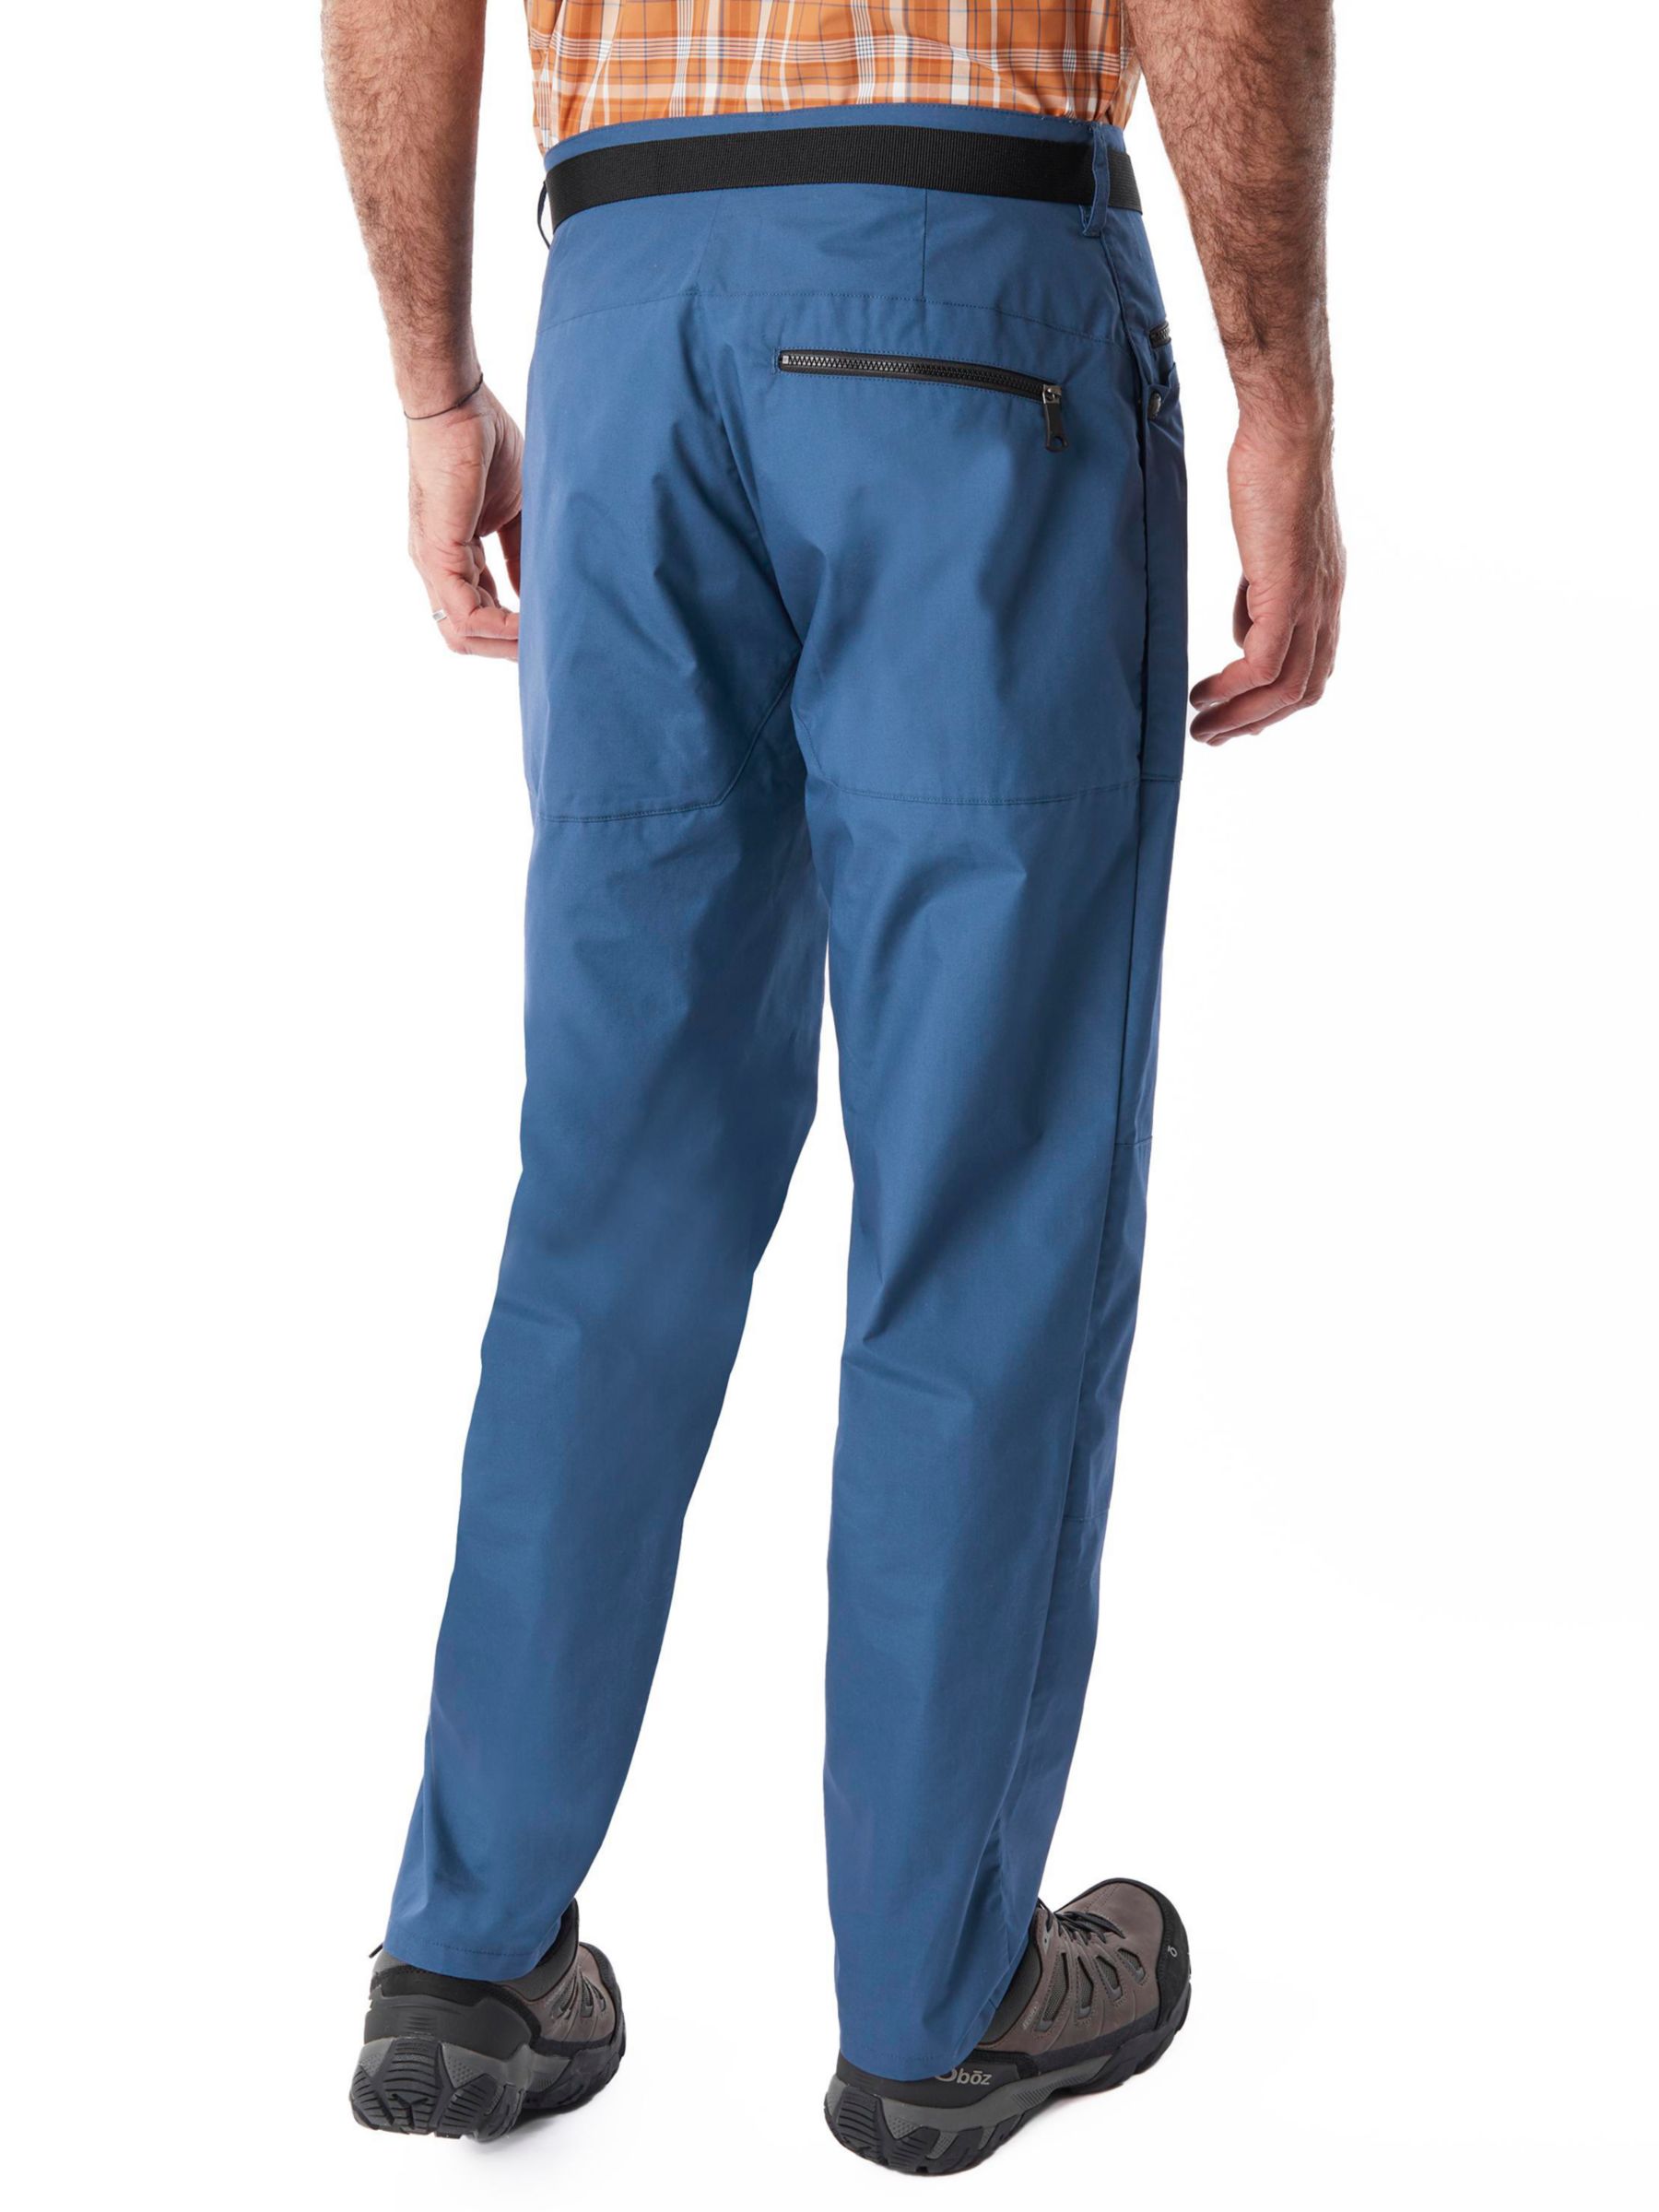 Buy Rohan Multi-Functional Bags Trousers, Cumbria Blue Online at johnlewis.com